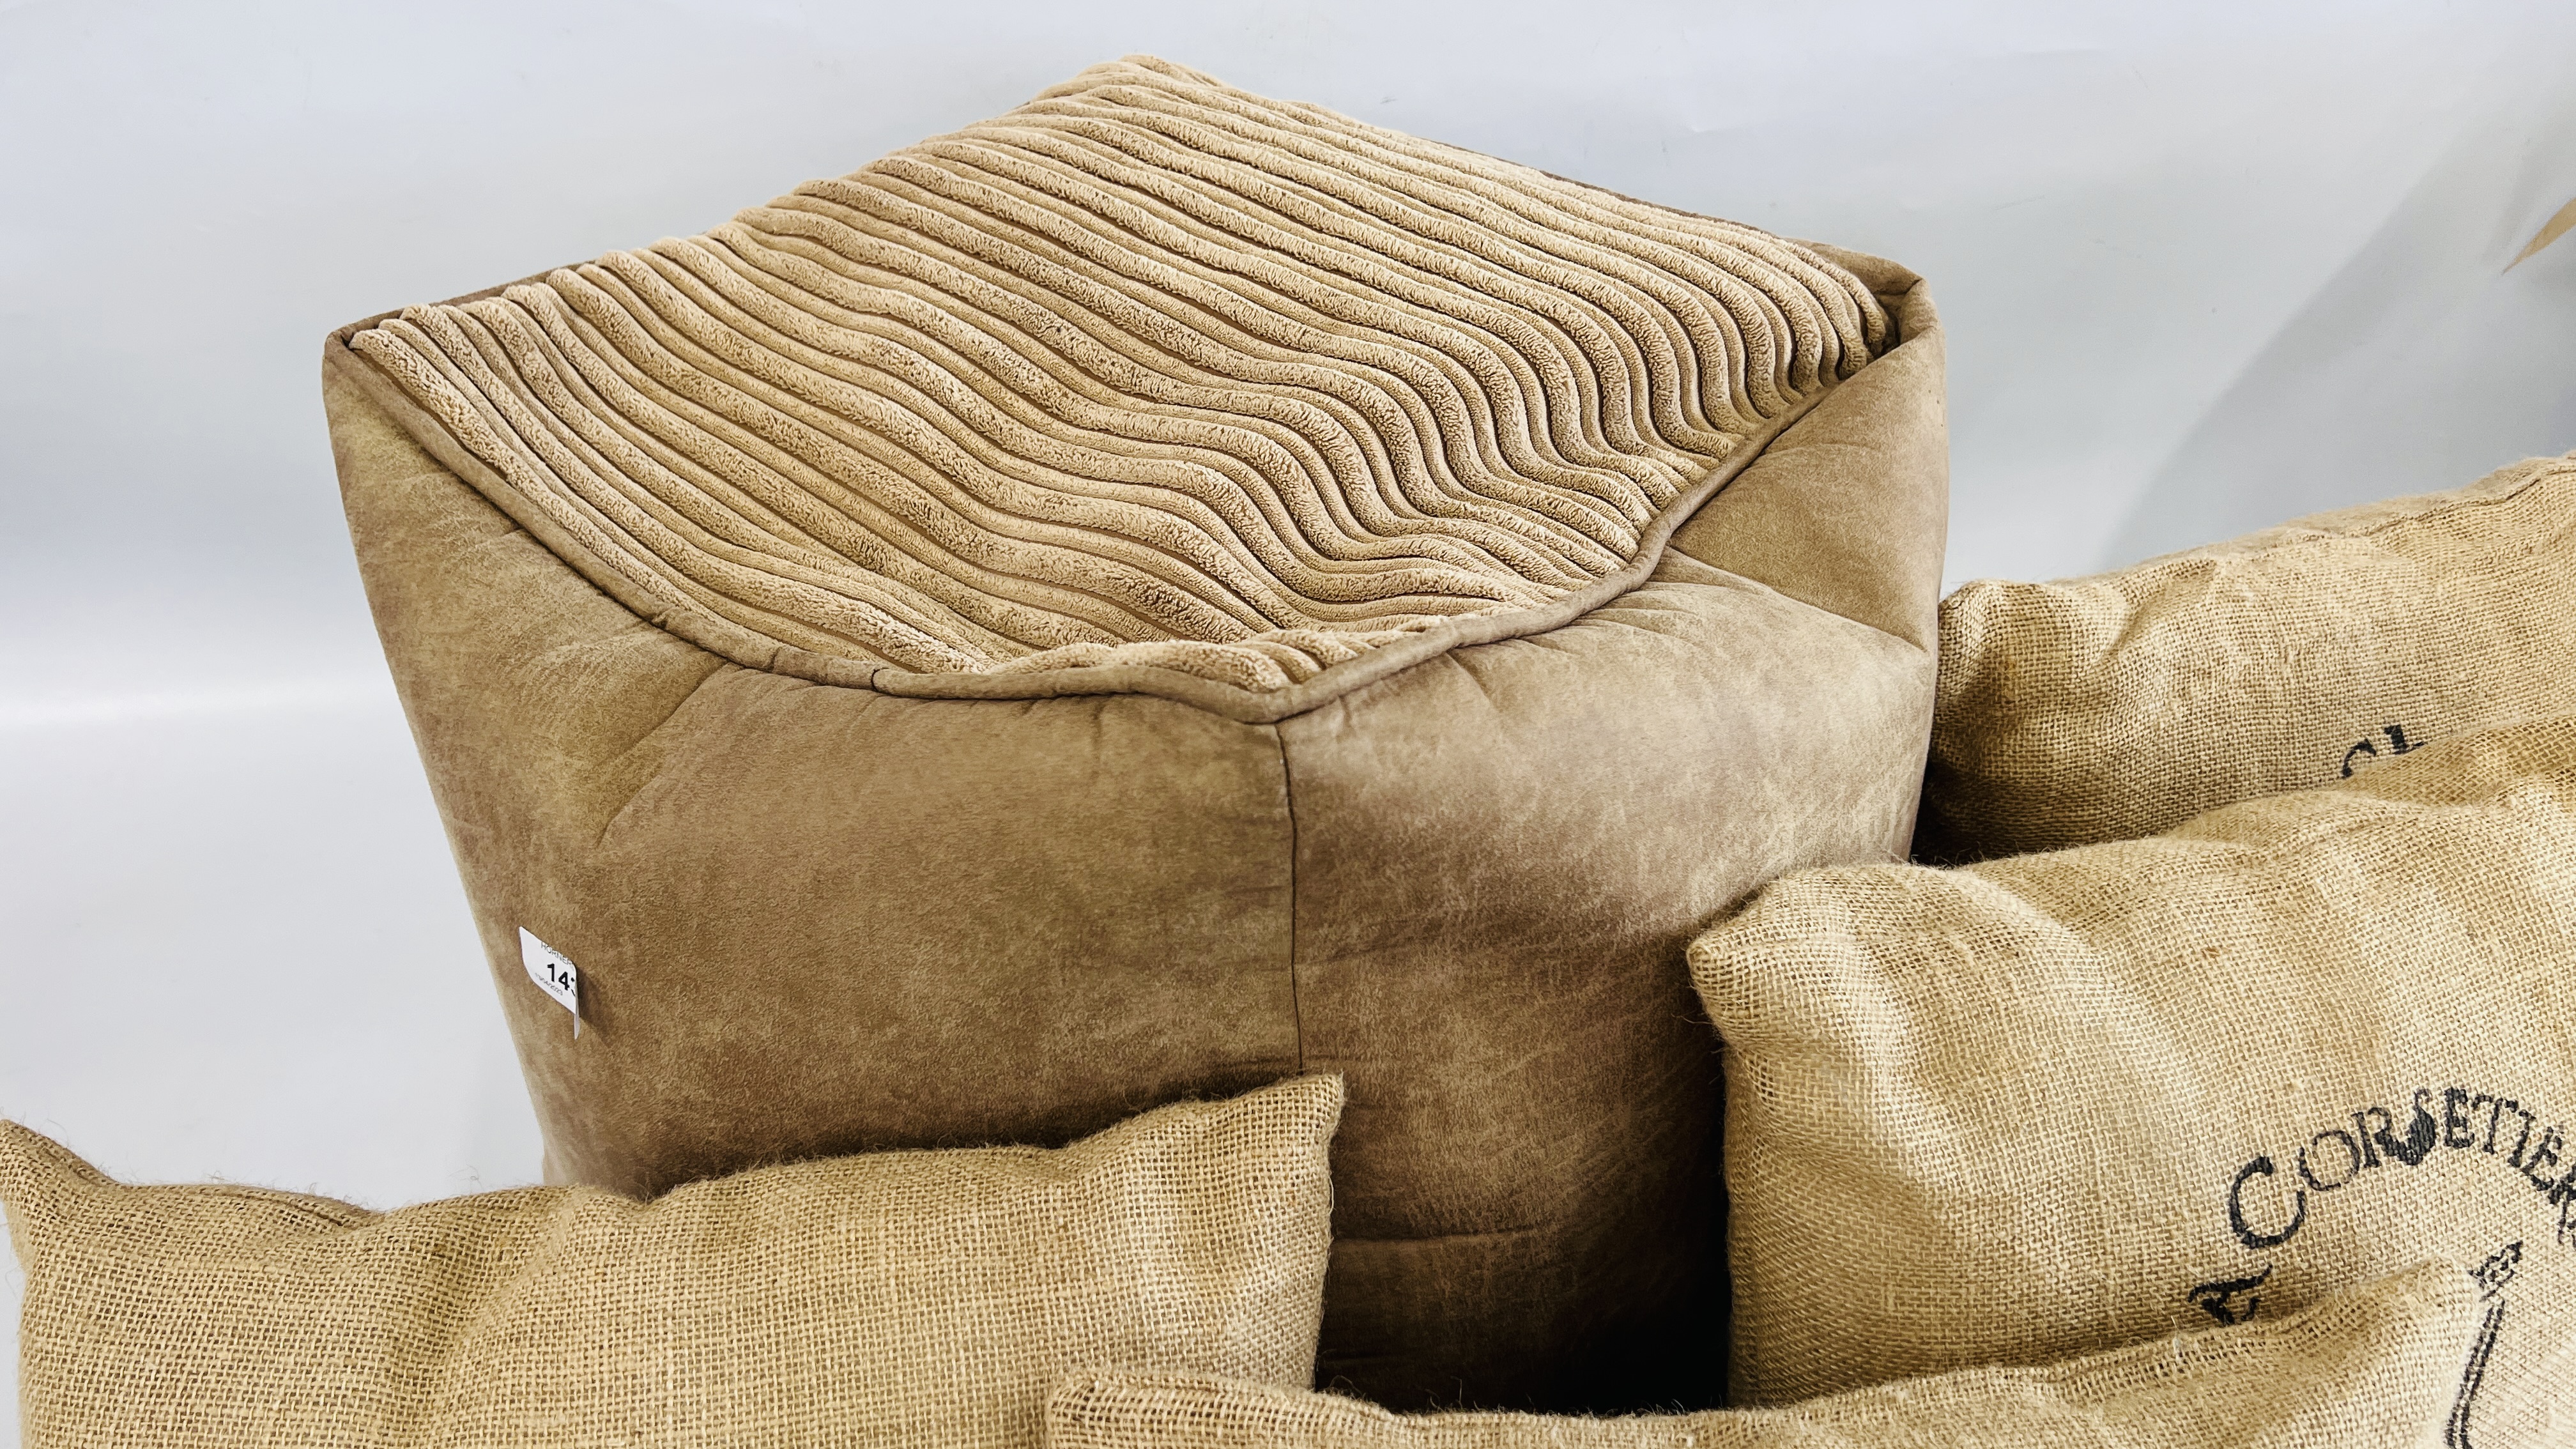 4 X RUSTIC HESSIAN CUSHIONS AND DUNELM POUFFE. - Image 4 of 4